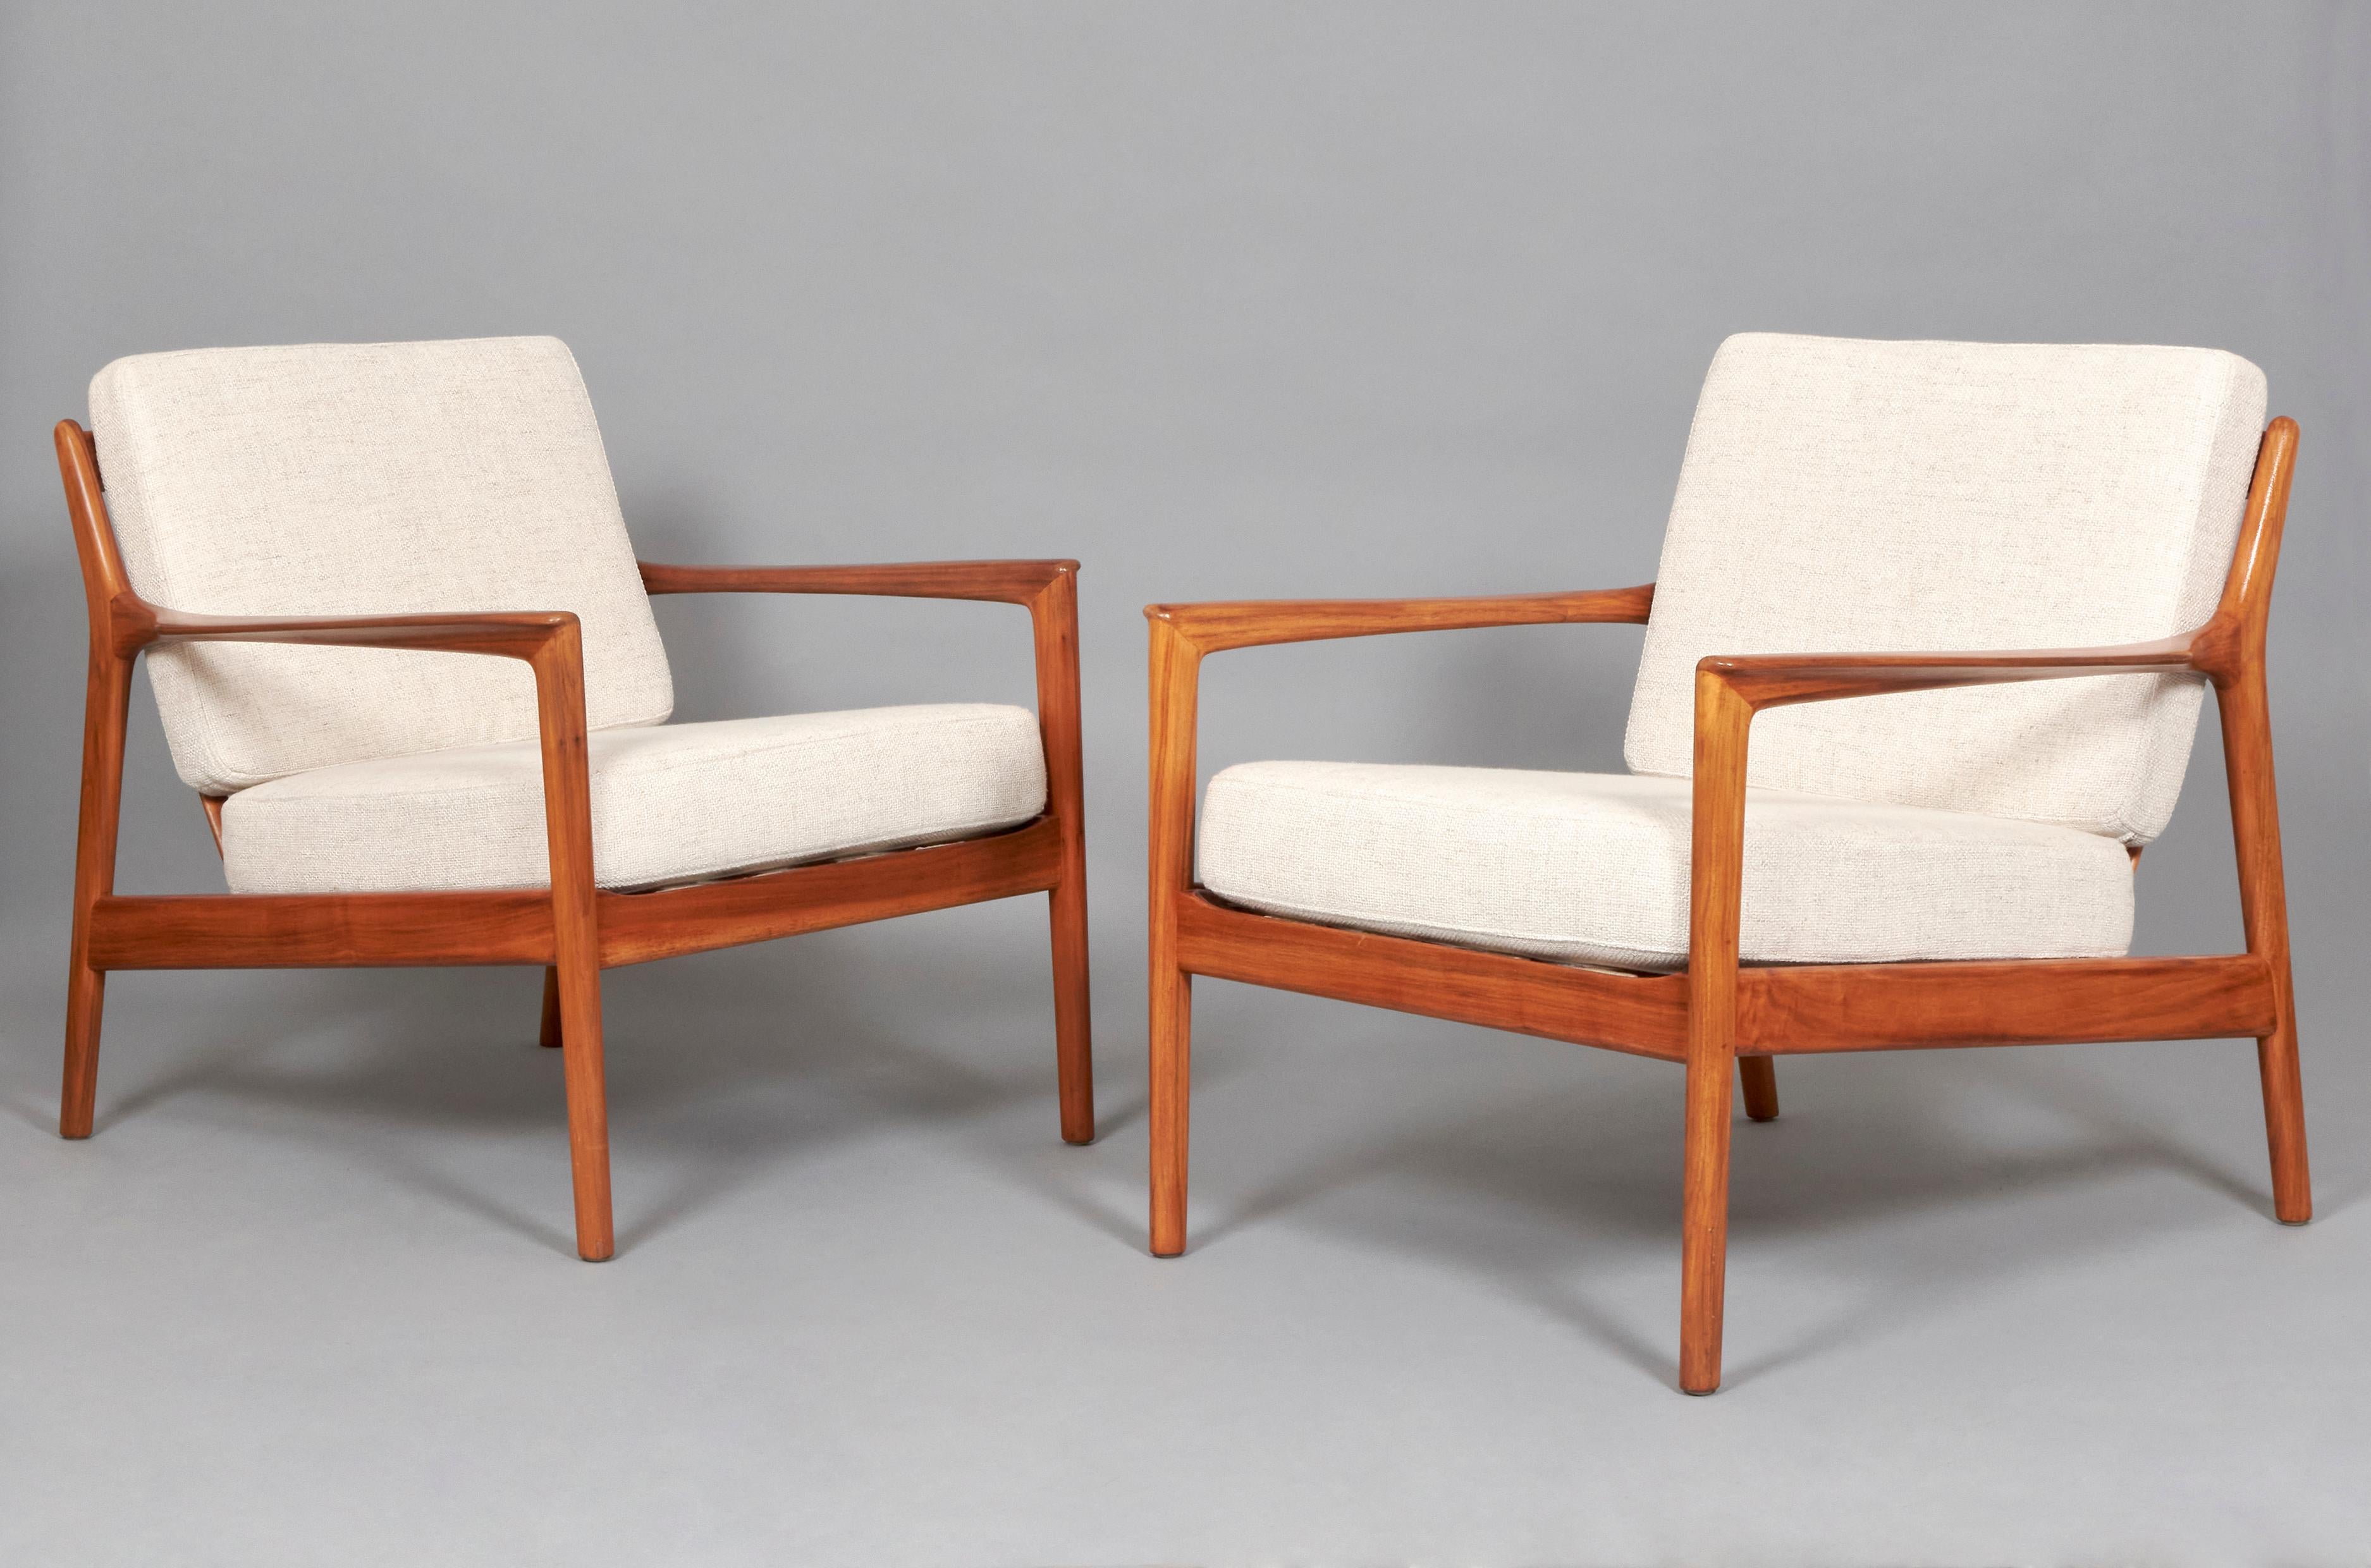 Midcentury Folke Ohlsson Armchair model USA-75 In Good Condition For Sale In Madrid, ES